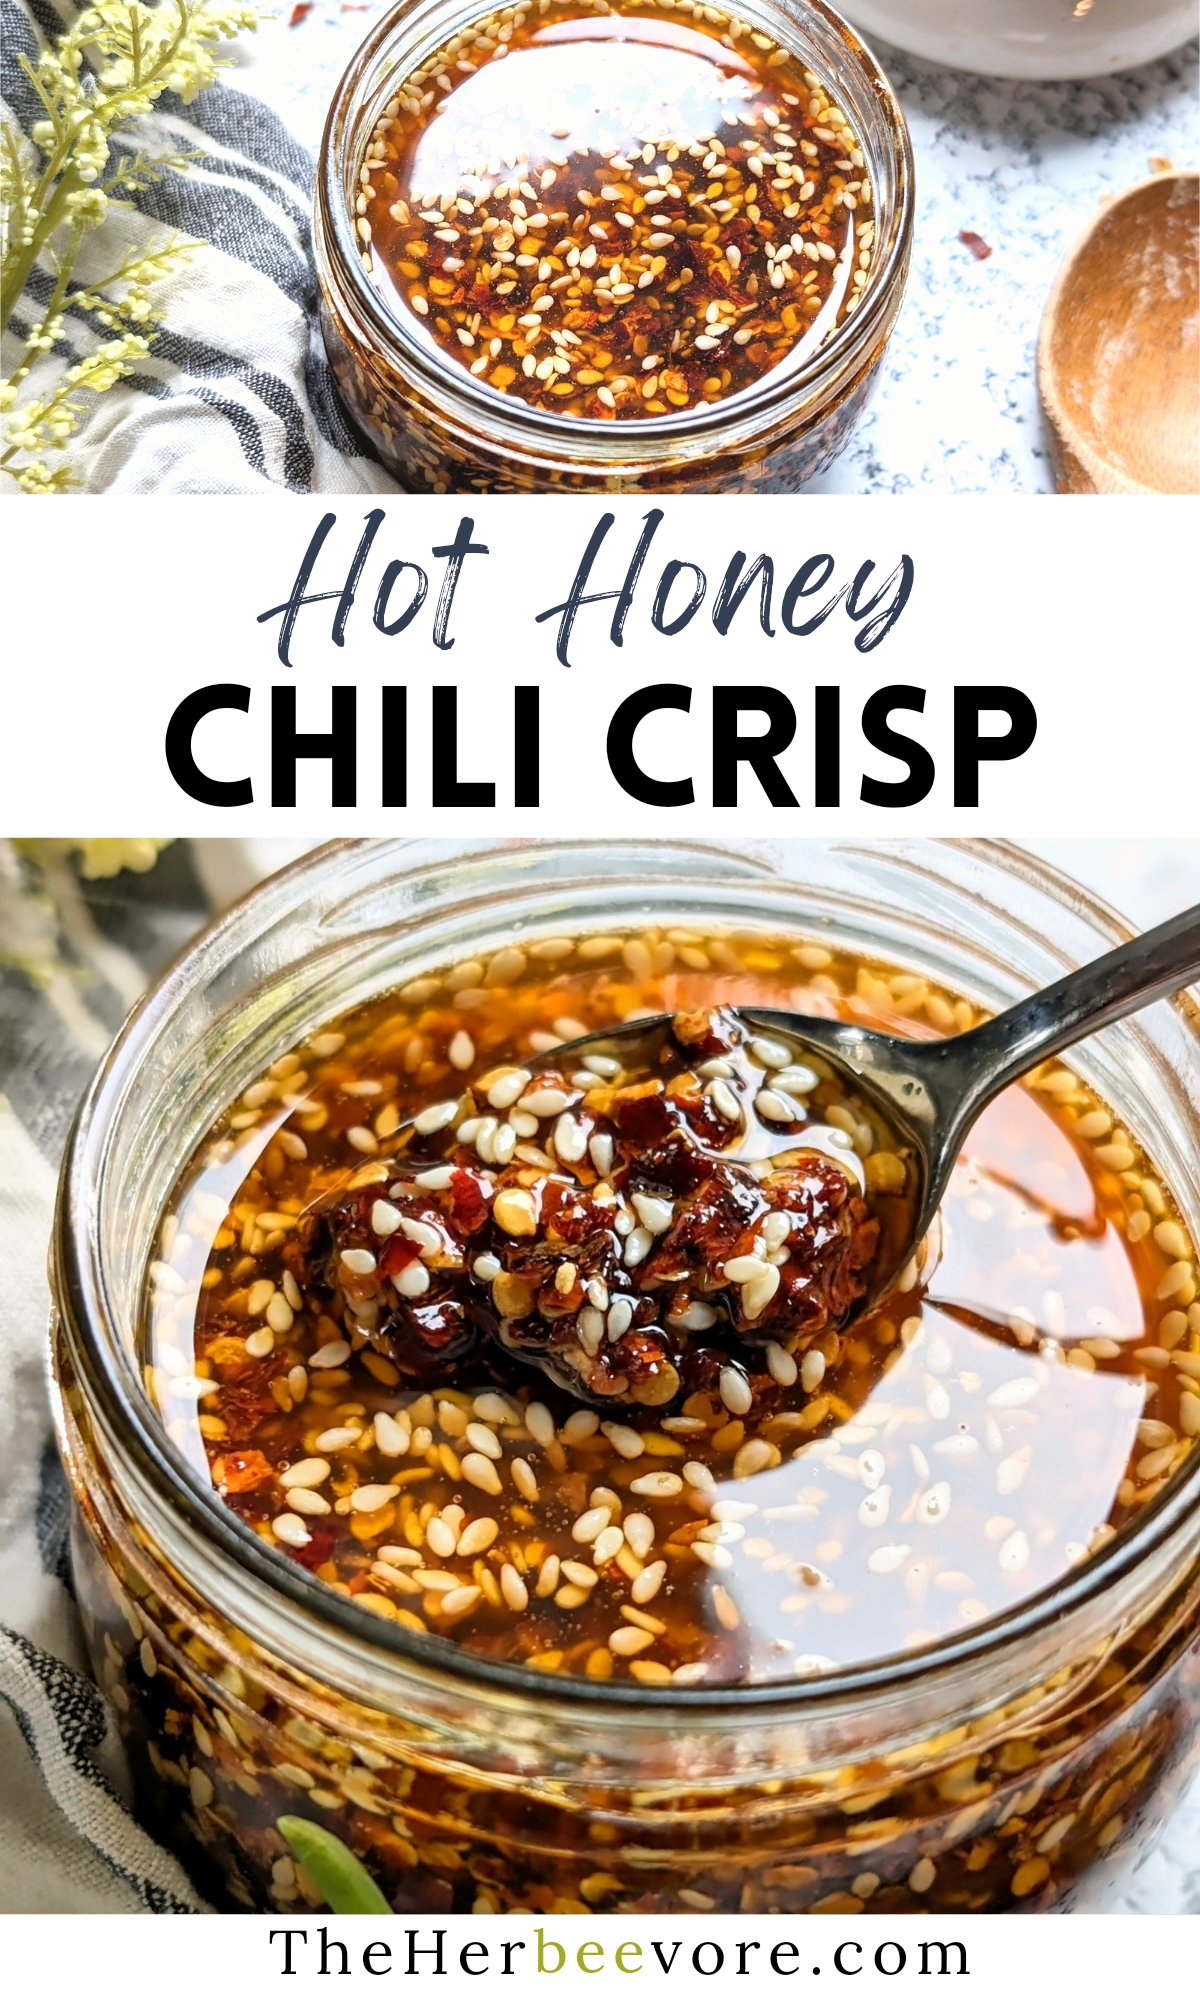 chili crisp with honey recipe how to make chili crisp at home easy homemade sauce blends with pantry spices